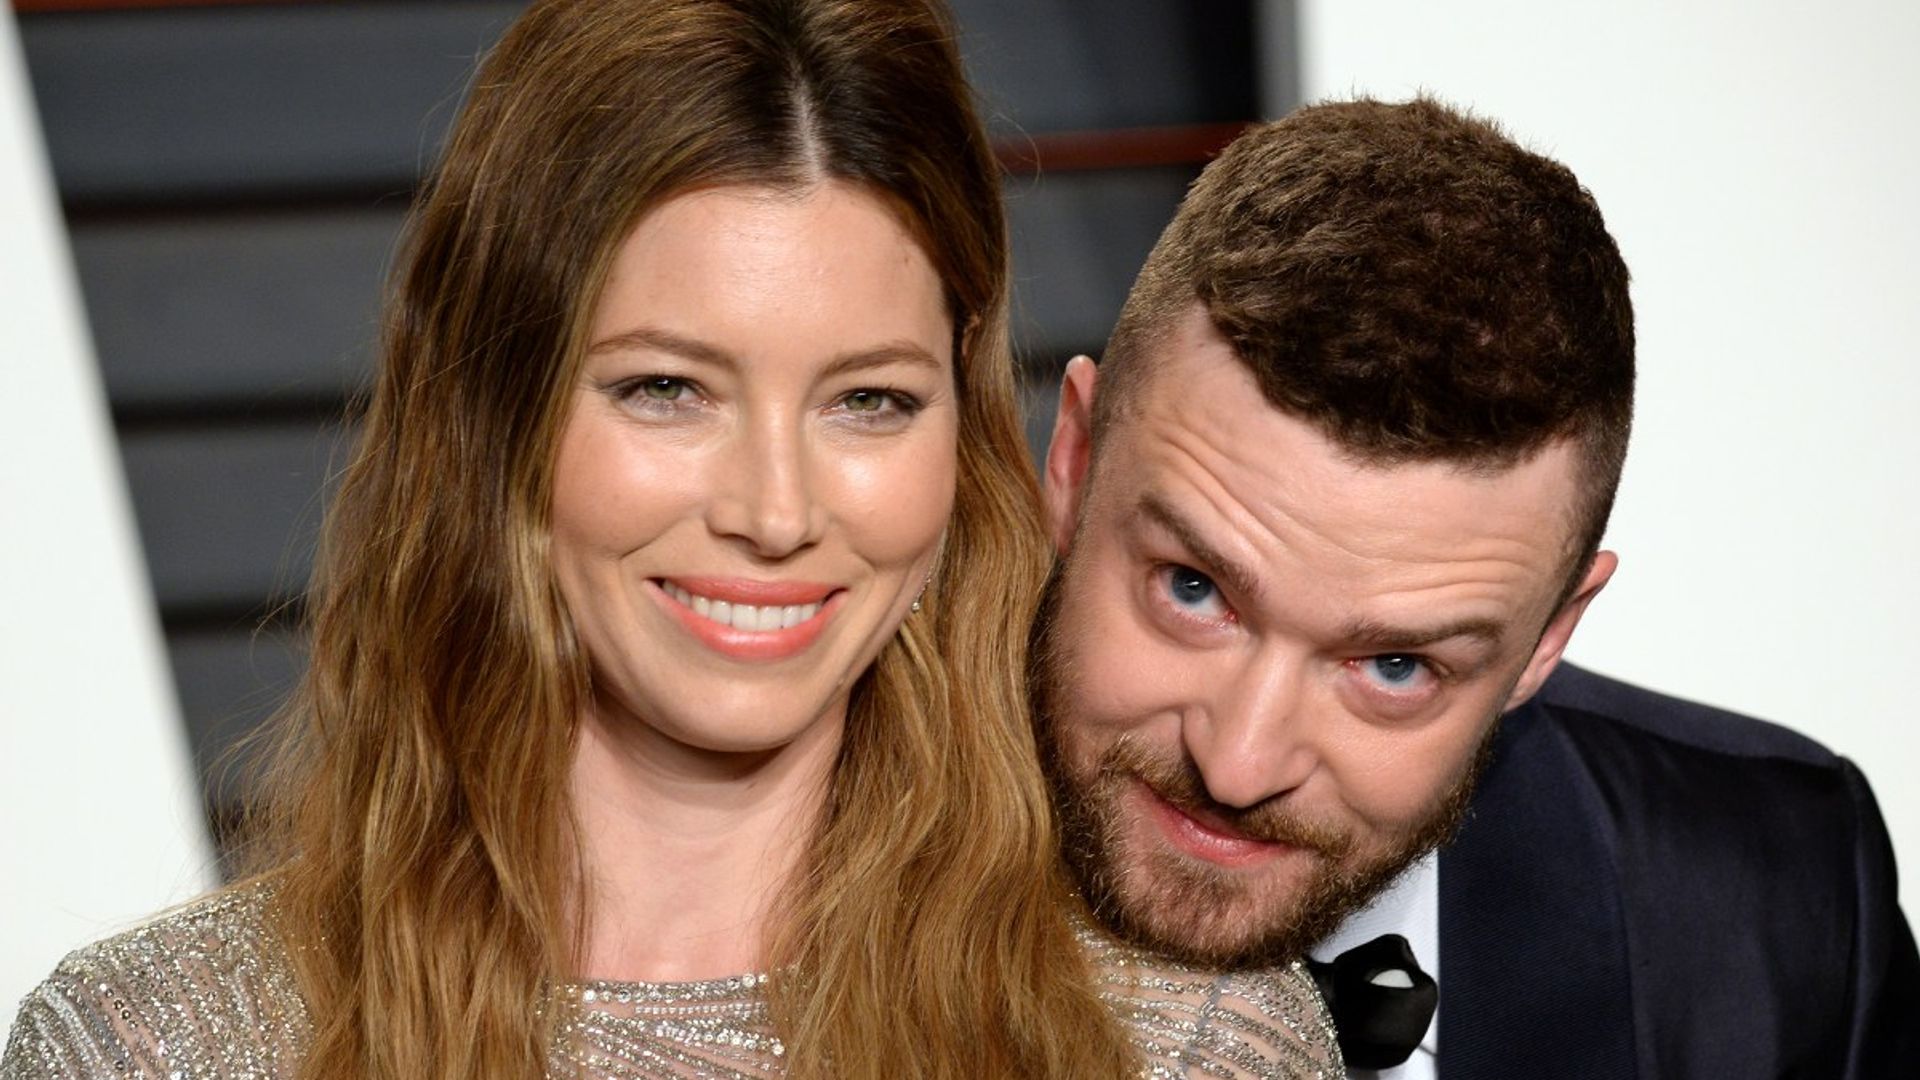 Jessica Biel makes surprising confession about family life with Justin Timberlake